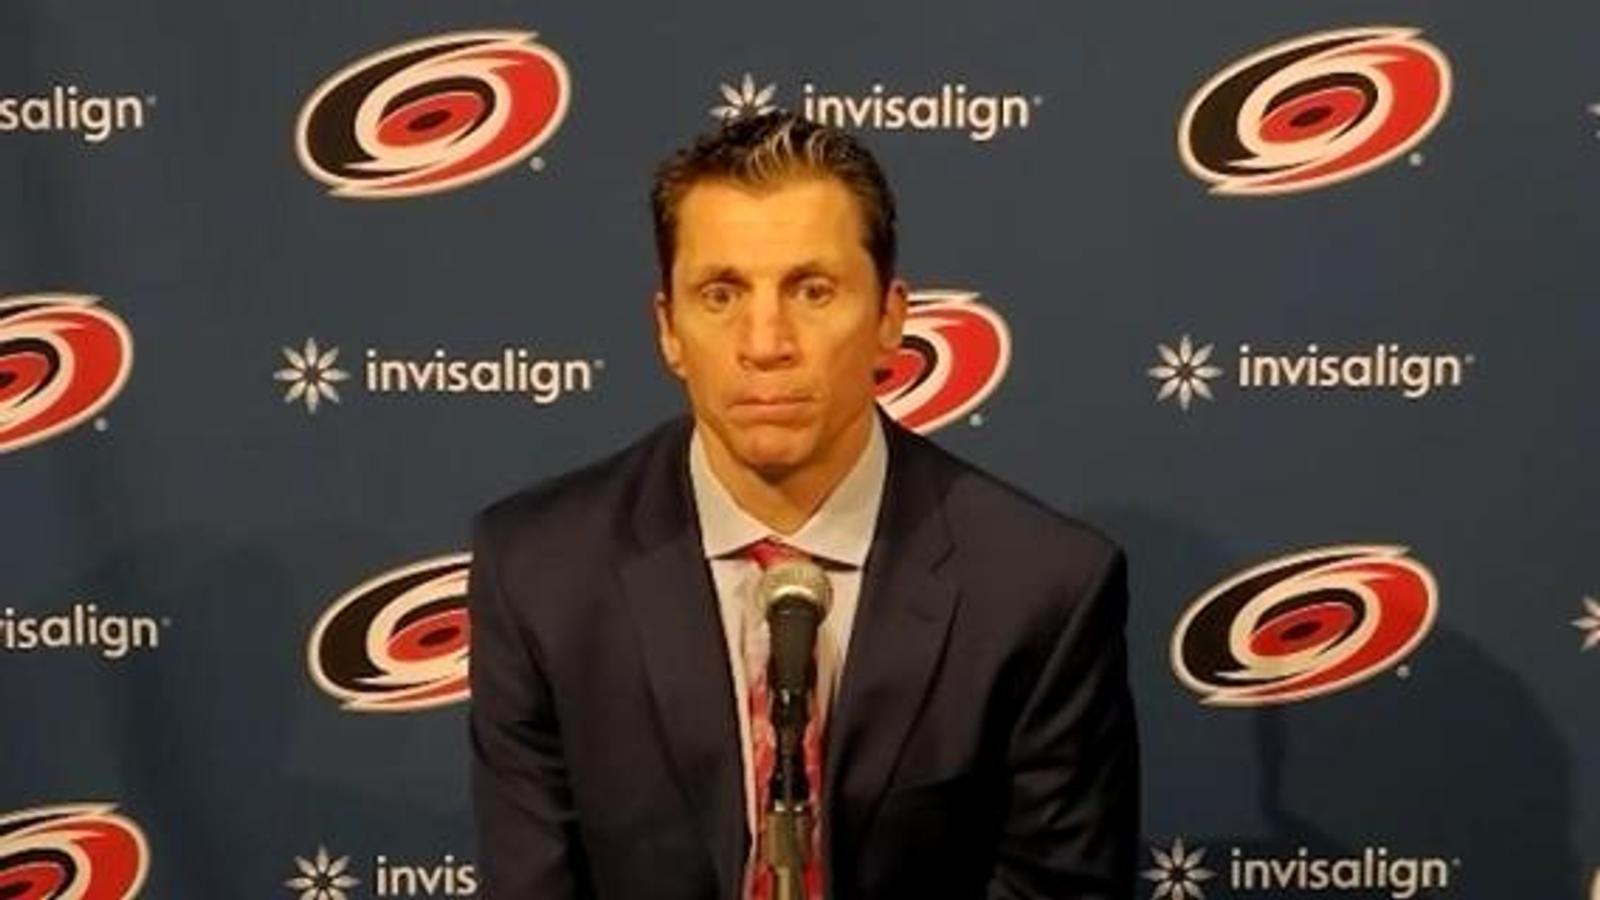 Tragedy hits Rod Brind’Amour and the entire Hurricanes family